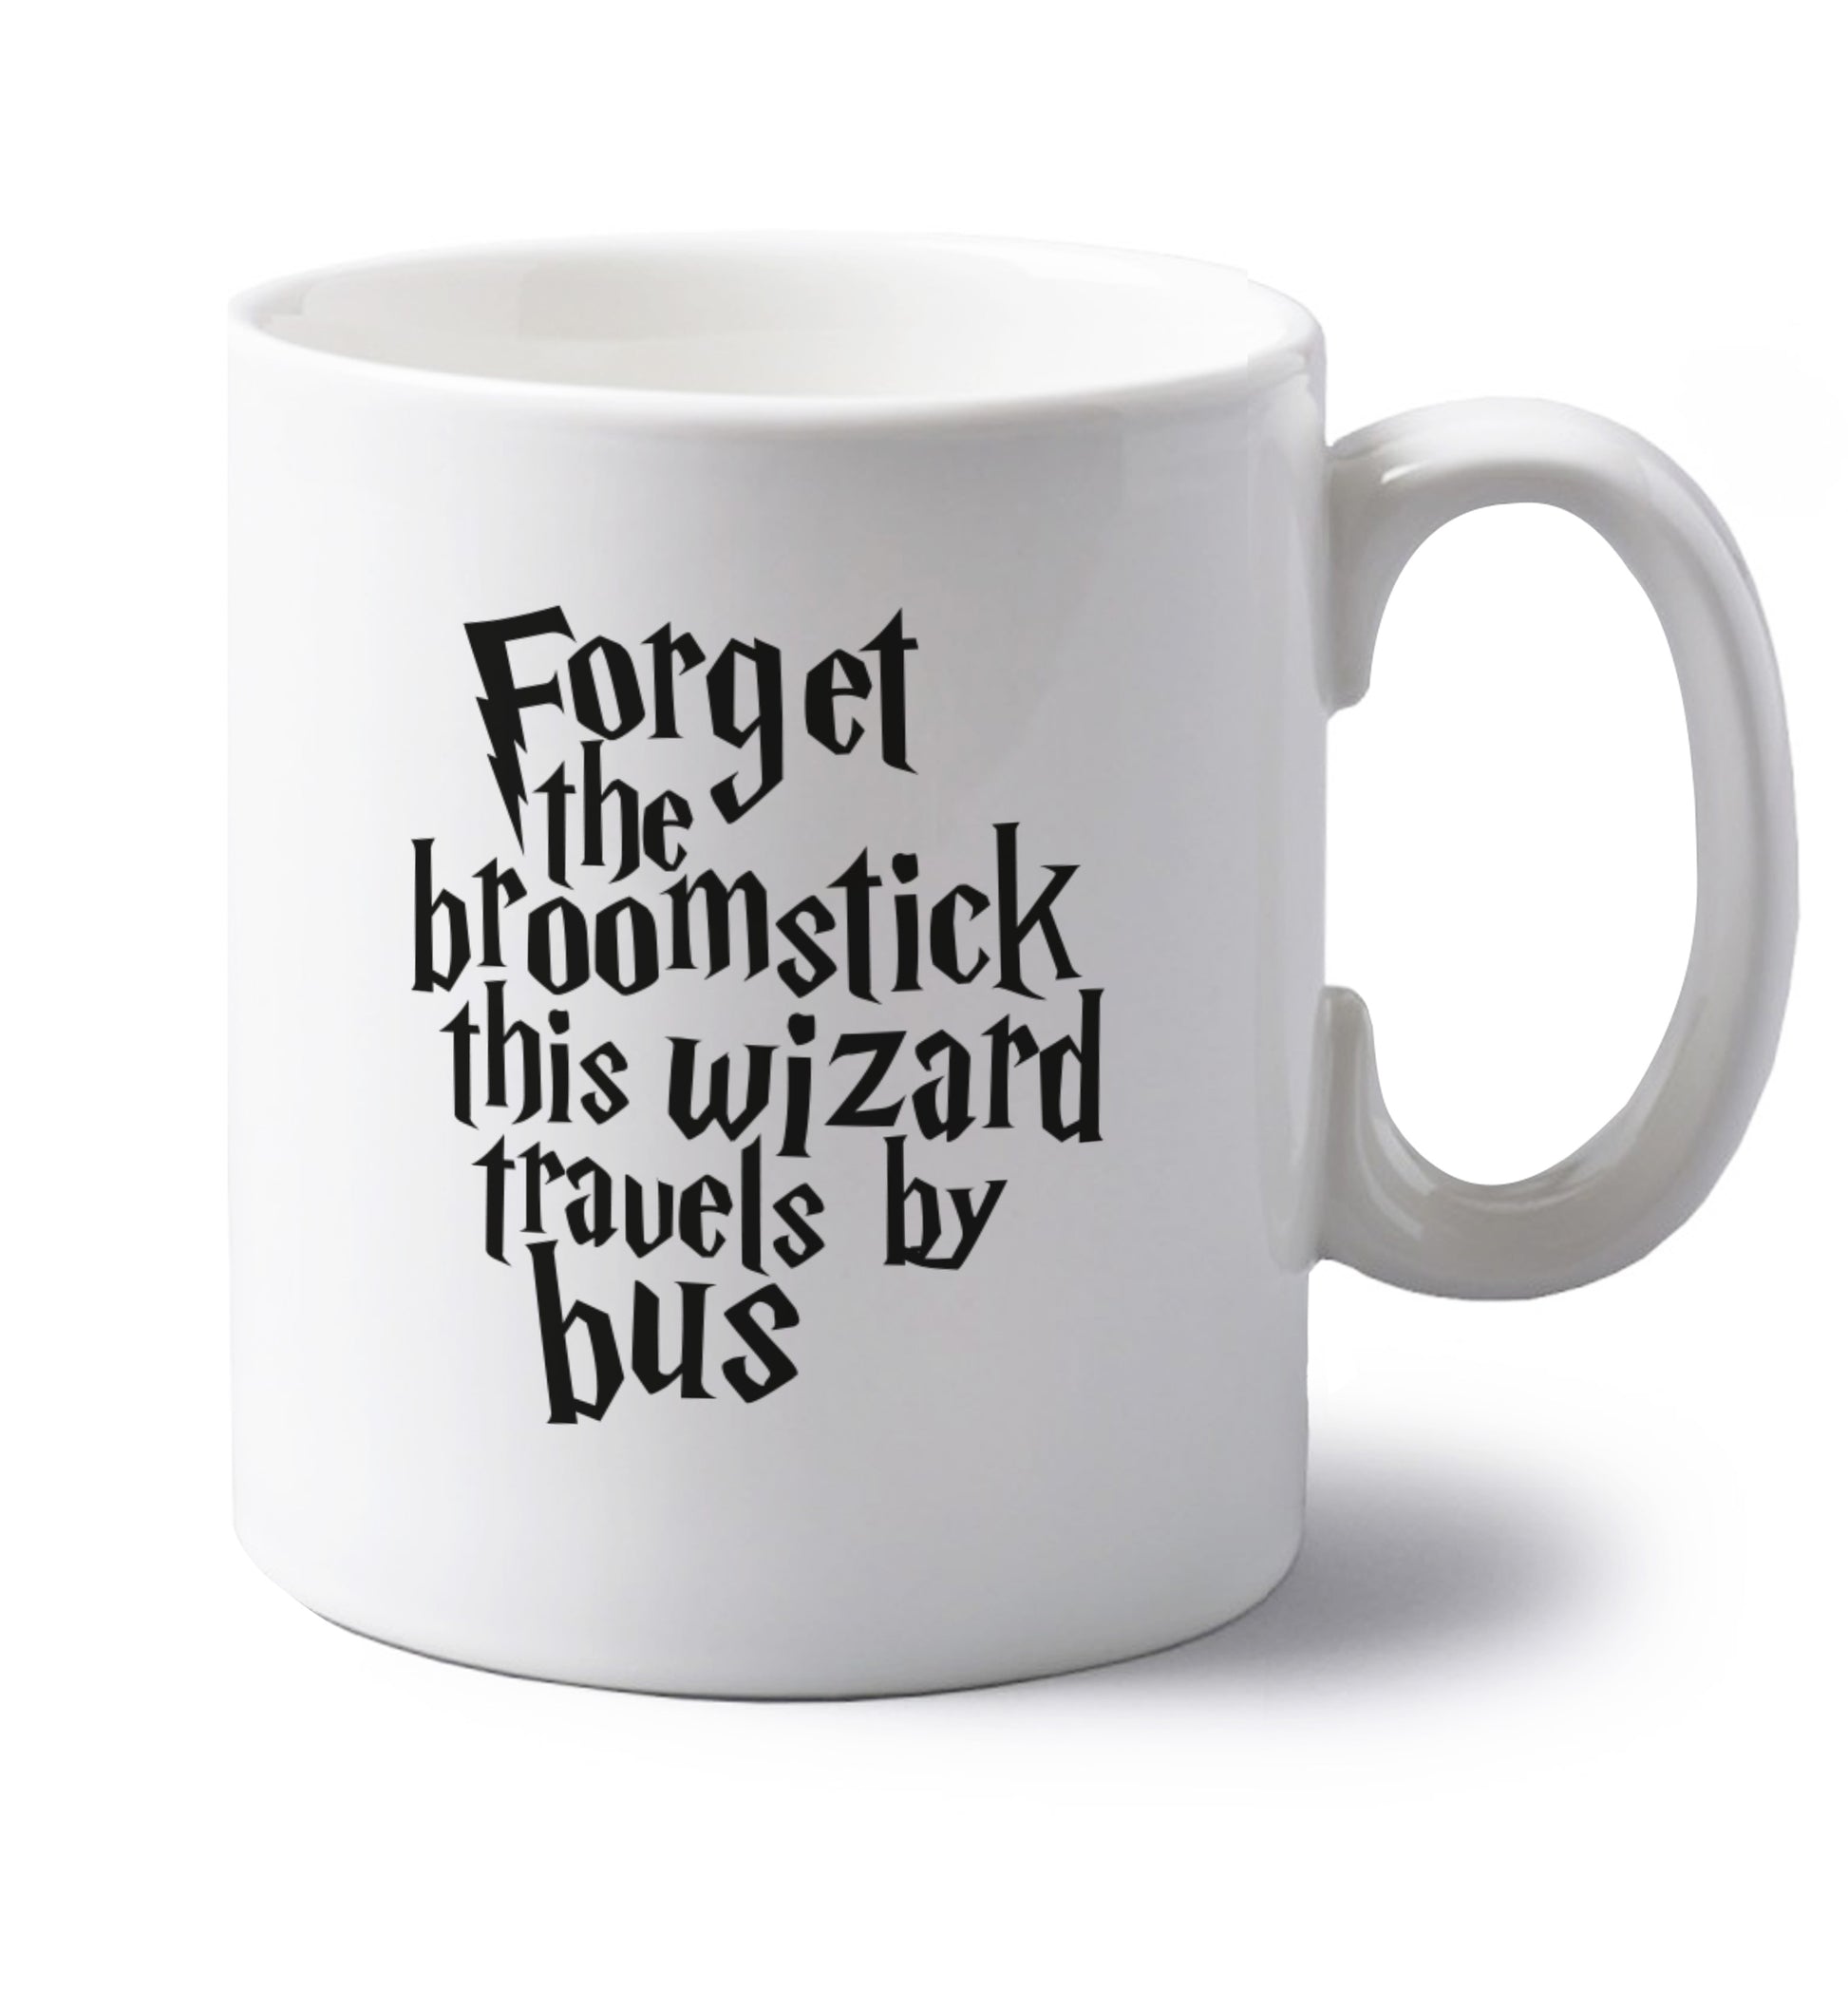 Forget the broomstick this wizard travels by bus left handed white ceramic mug 